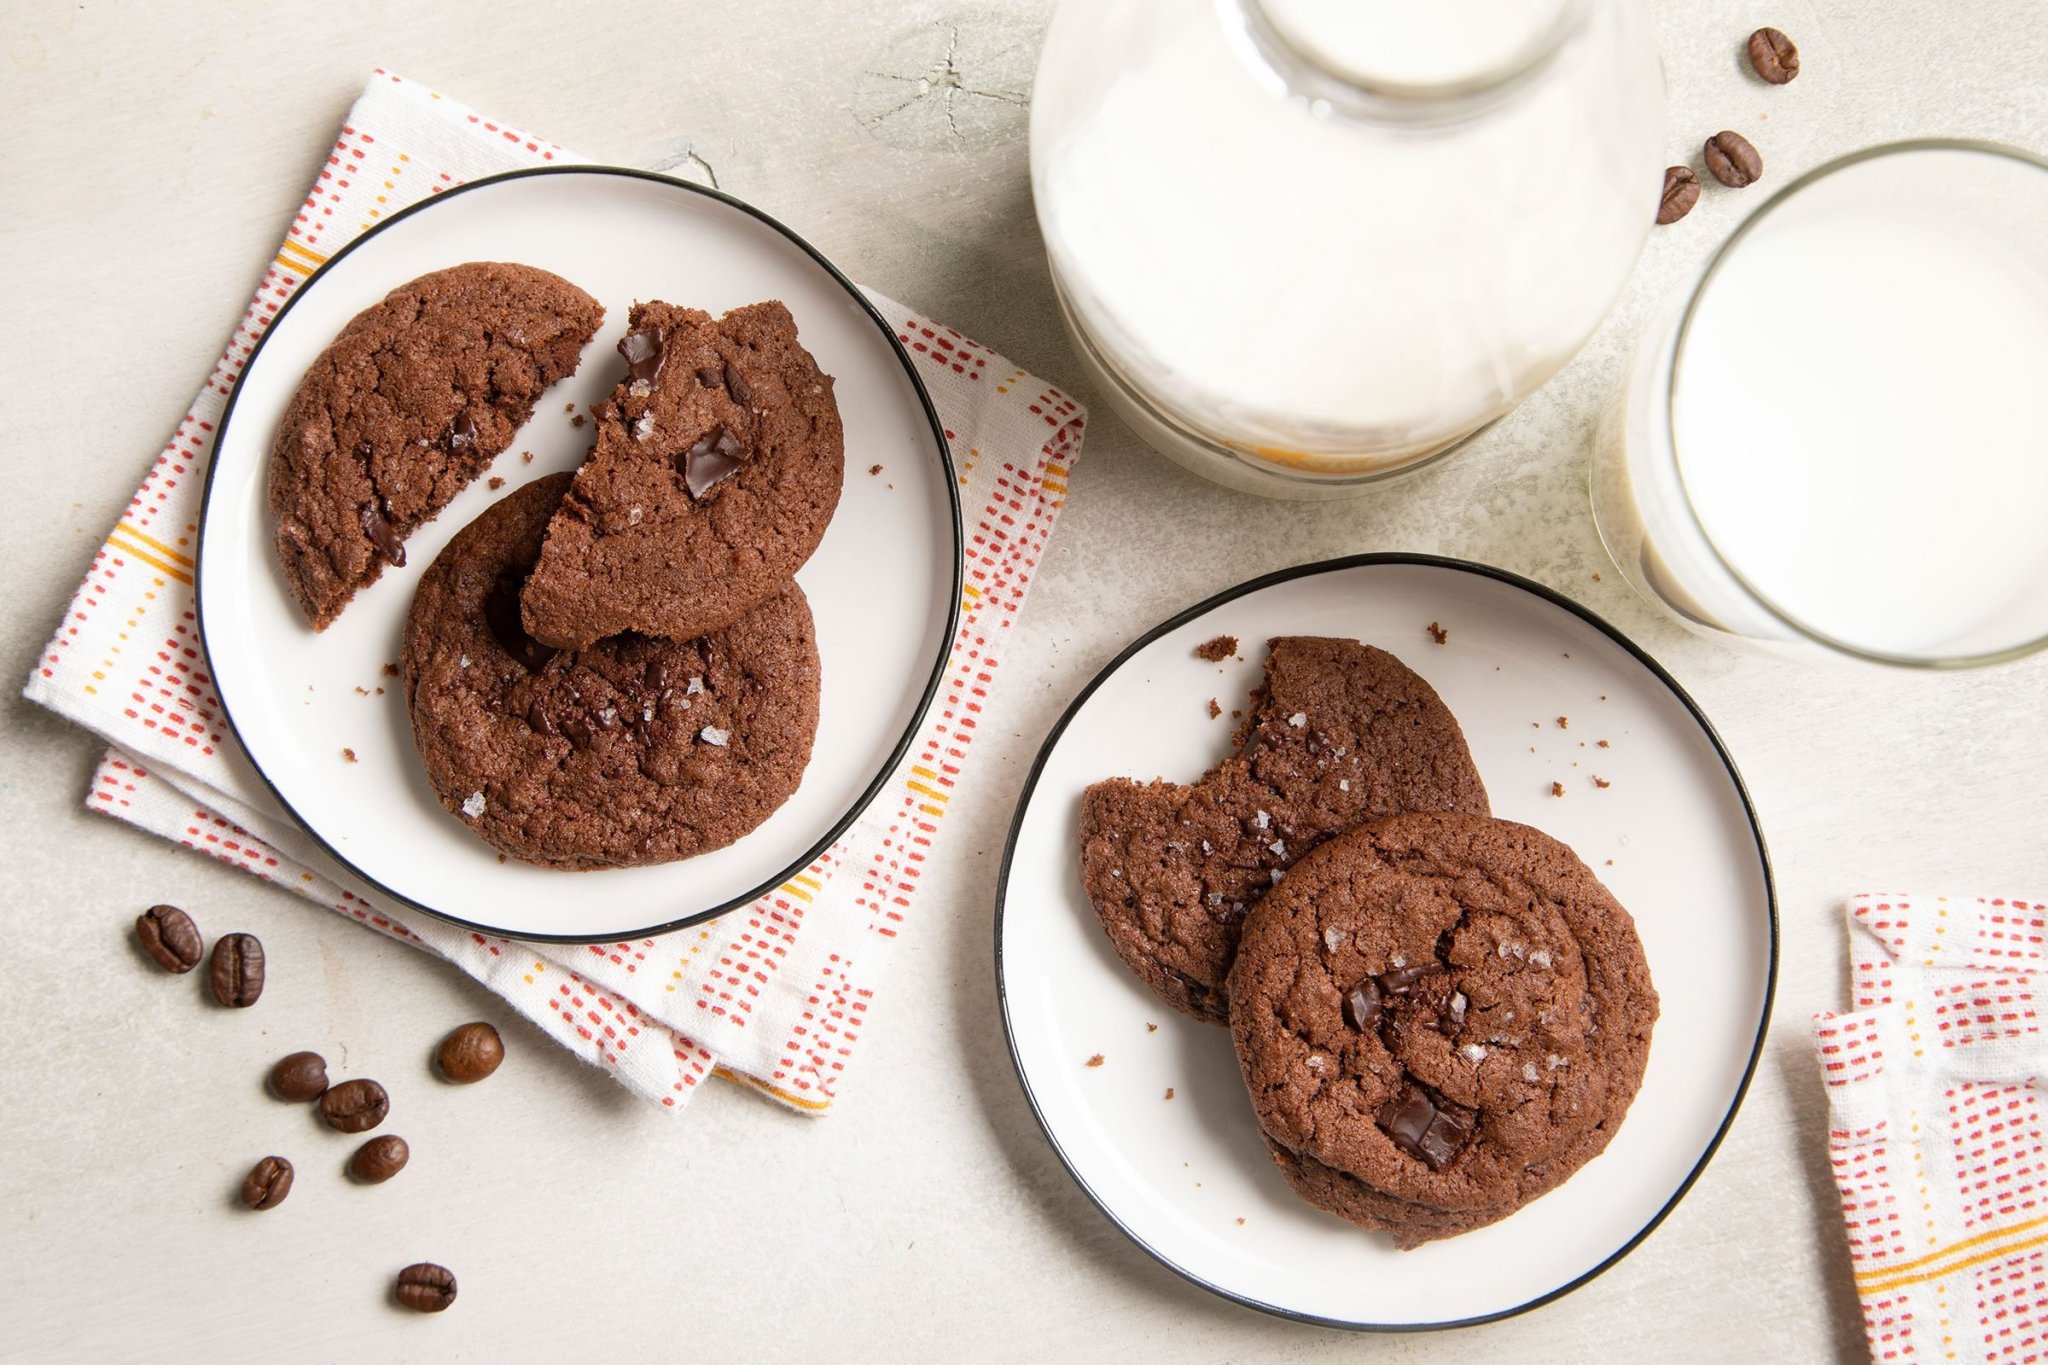 How to Make Rich, Chocolatey Espresso Cookies